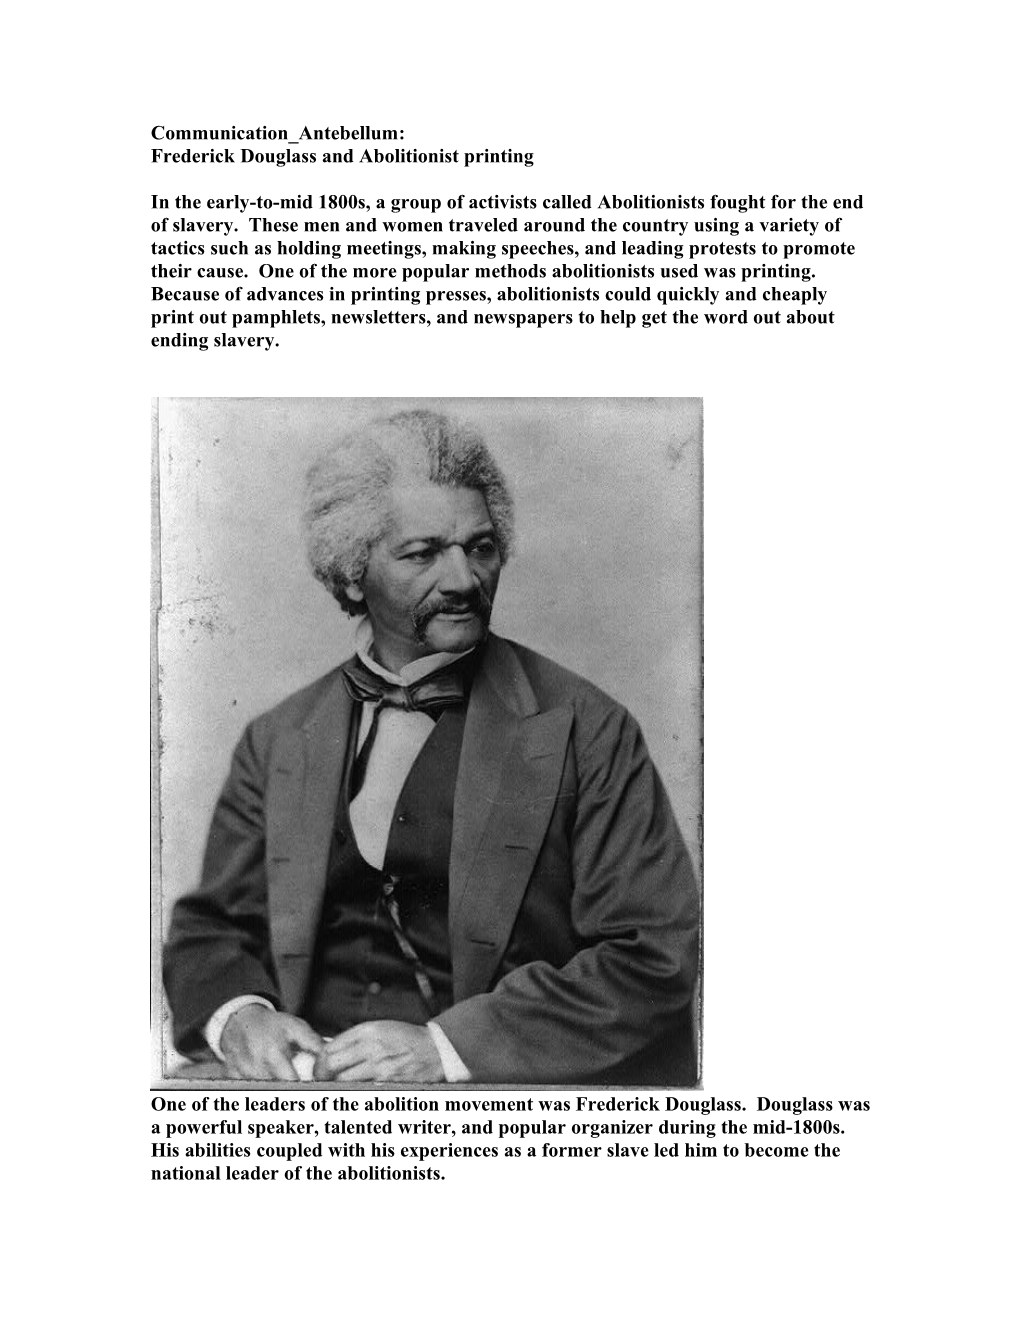 Frederick Douglass and Abolitionist Printing